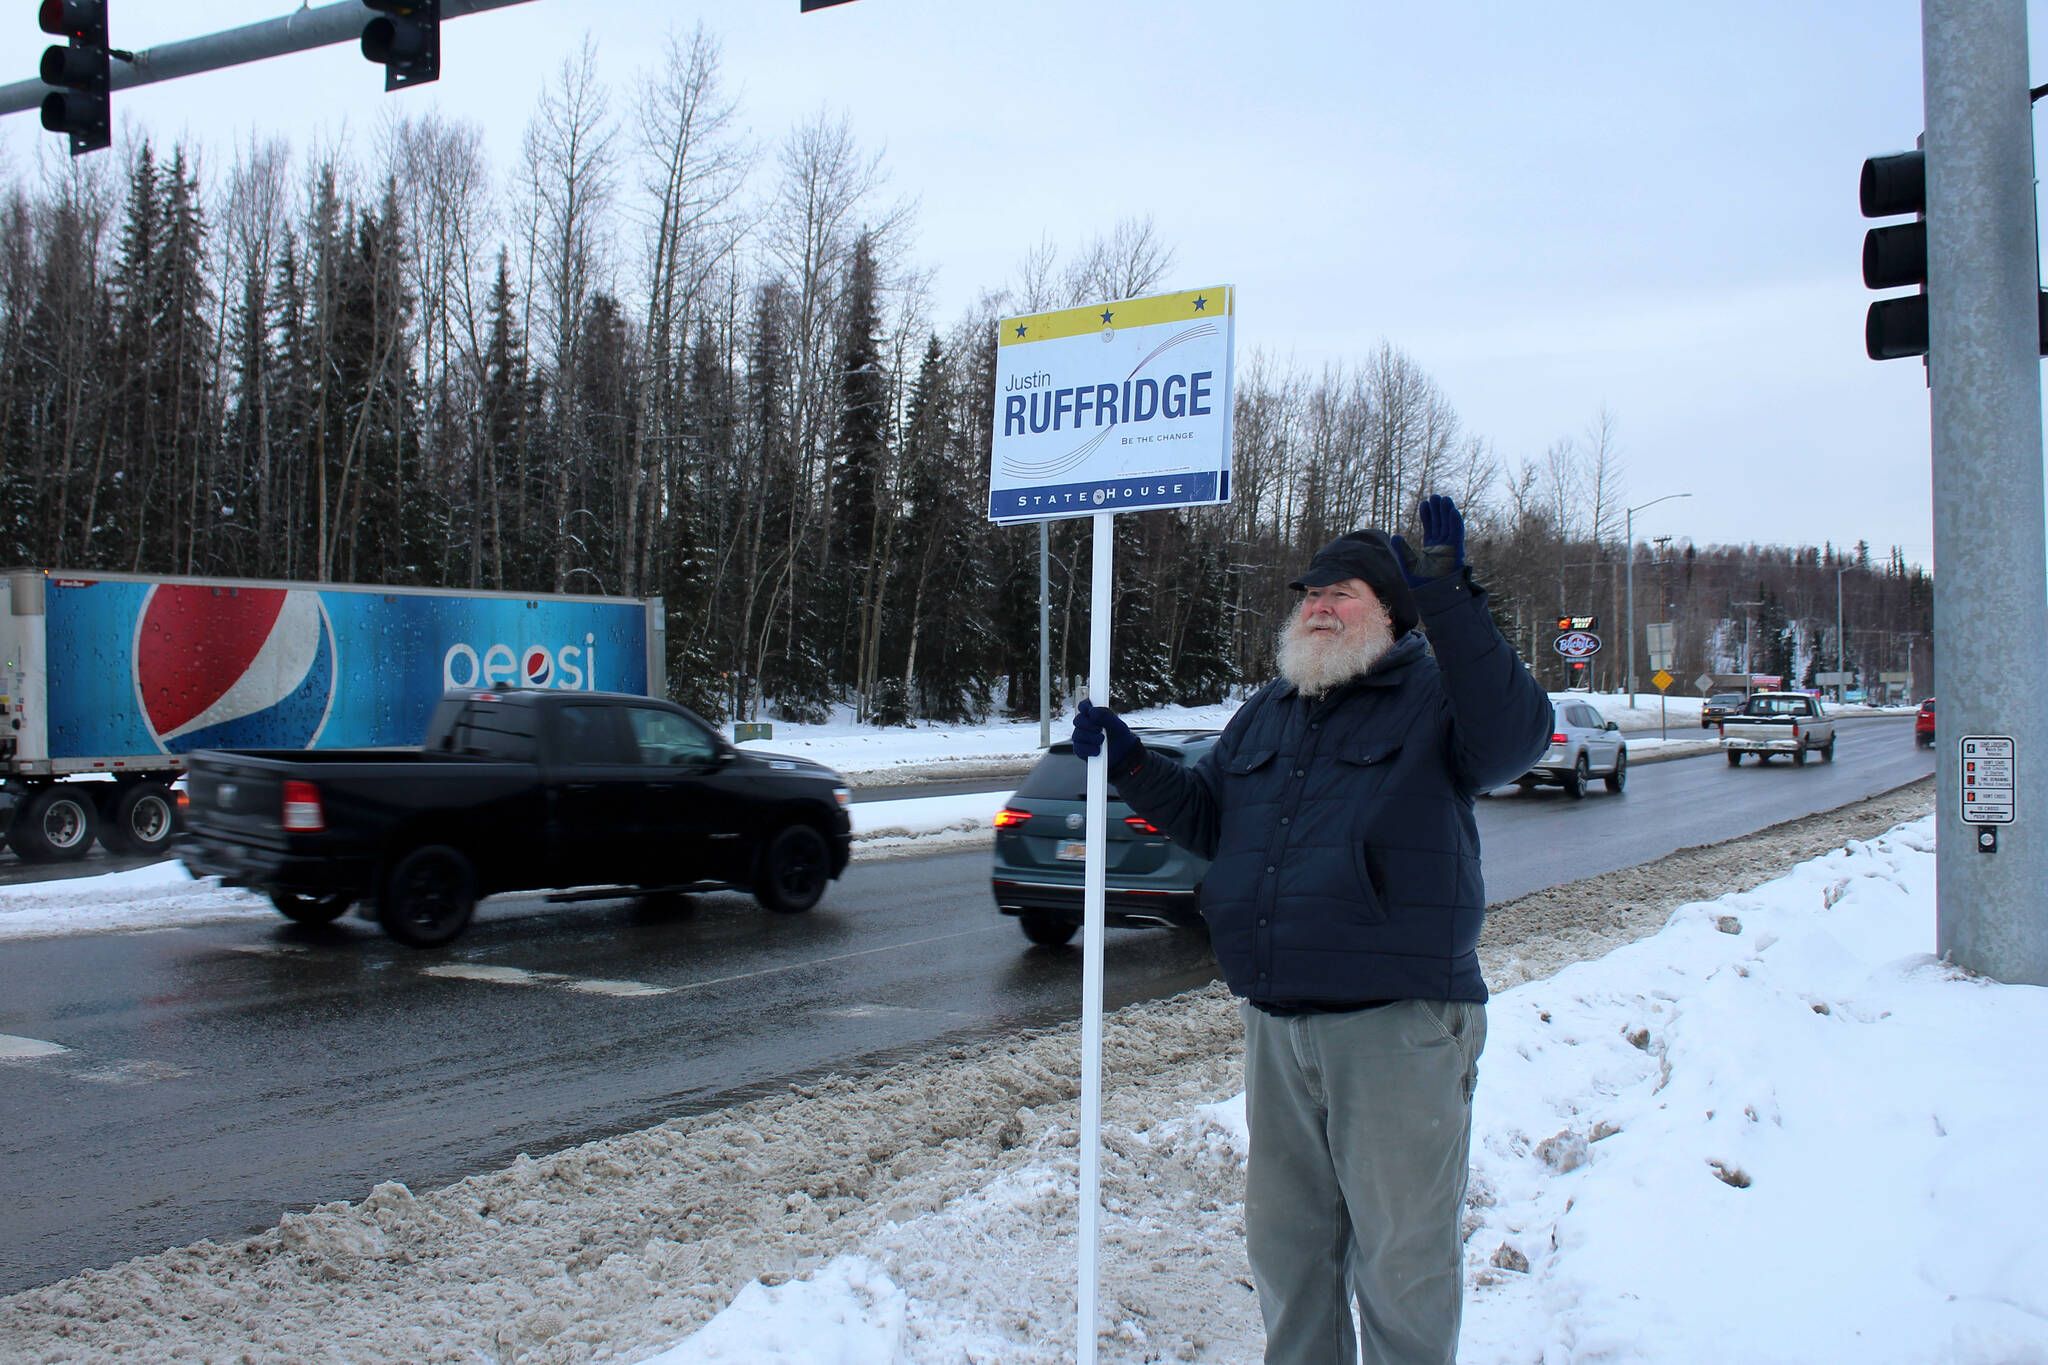 Larry Opperman waves a sign in support of Alaska House candidate Justin Ruffridge at the intersection of the Kenai Spur and Sterling highways on Tuesday, Nov. 8, 2022 in Soldotna, Alaska. (Ashlyn O’Hara/Peninsula Clarion)